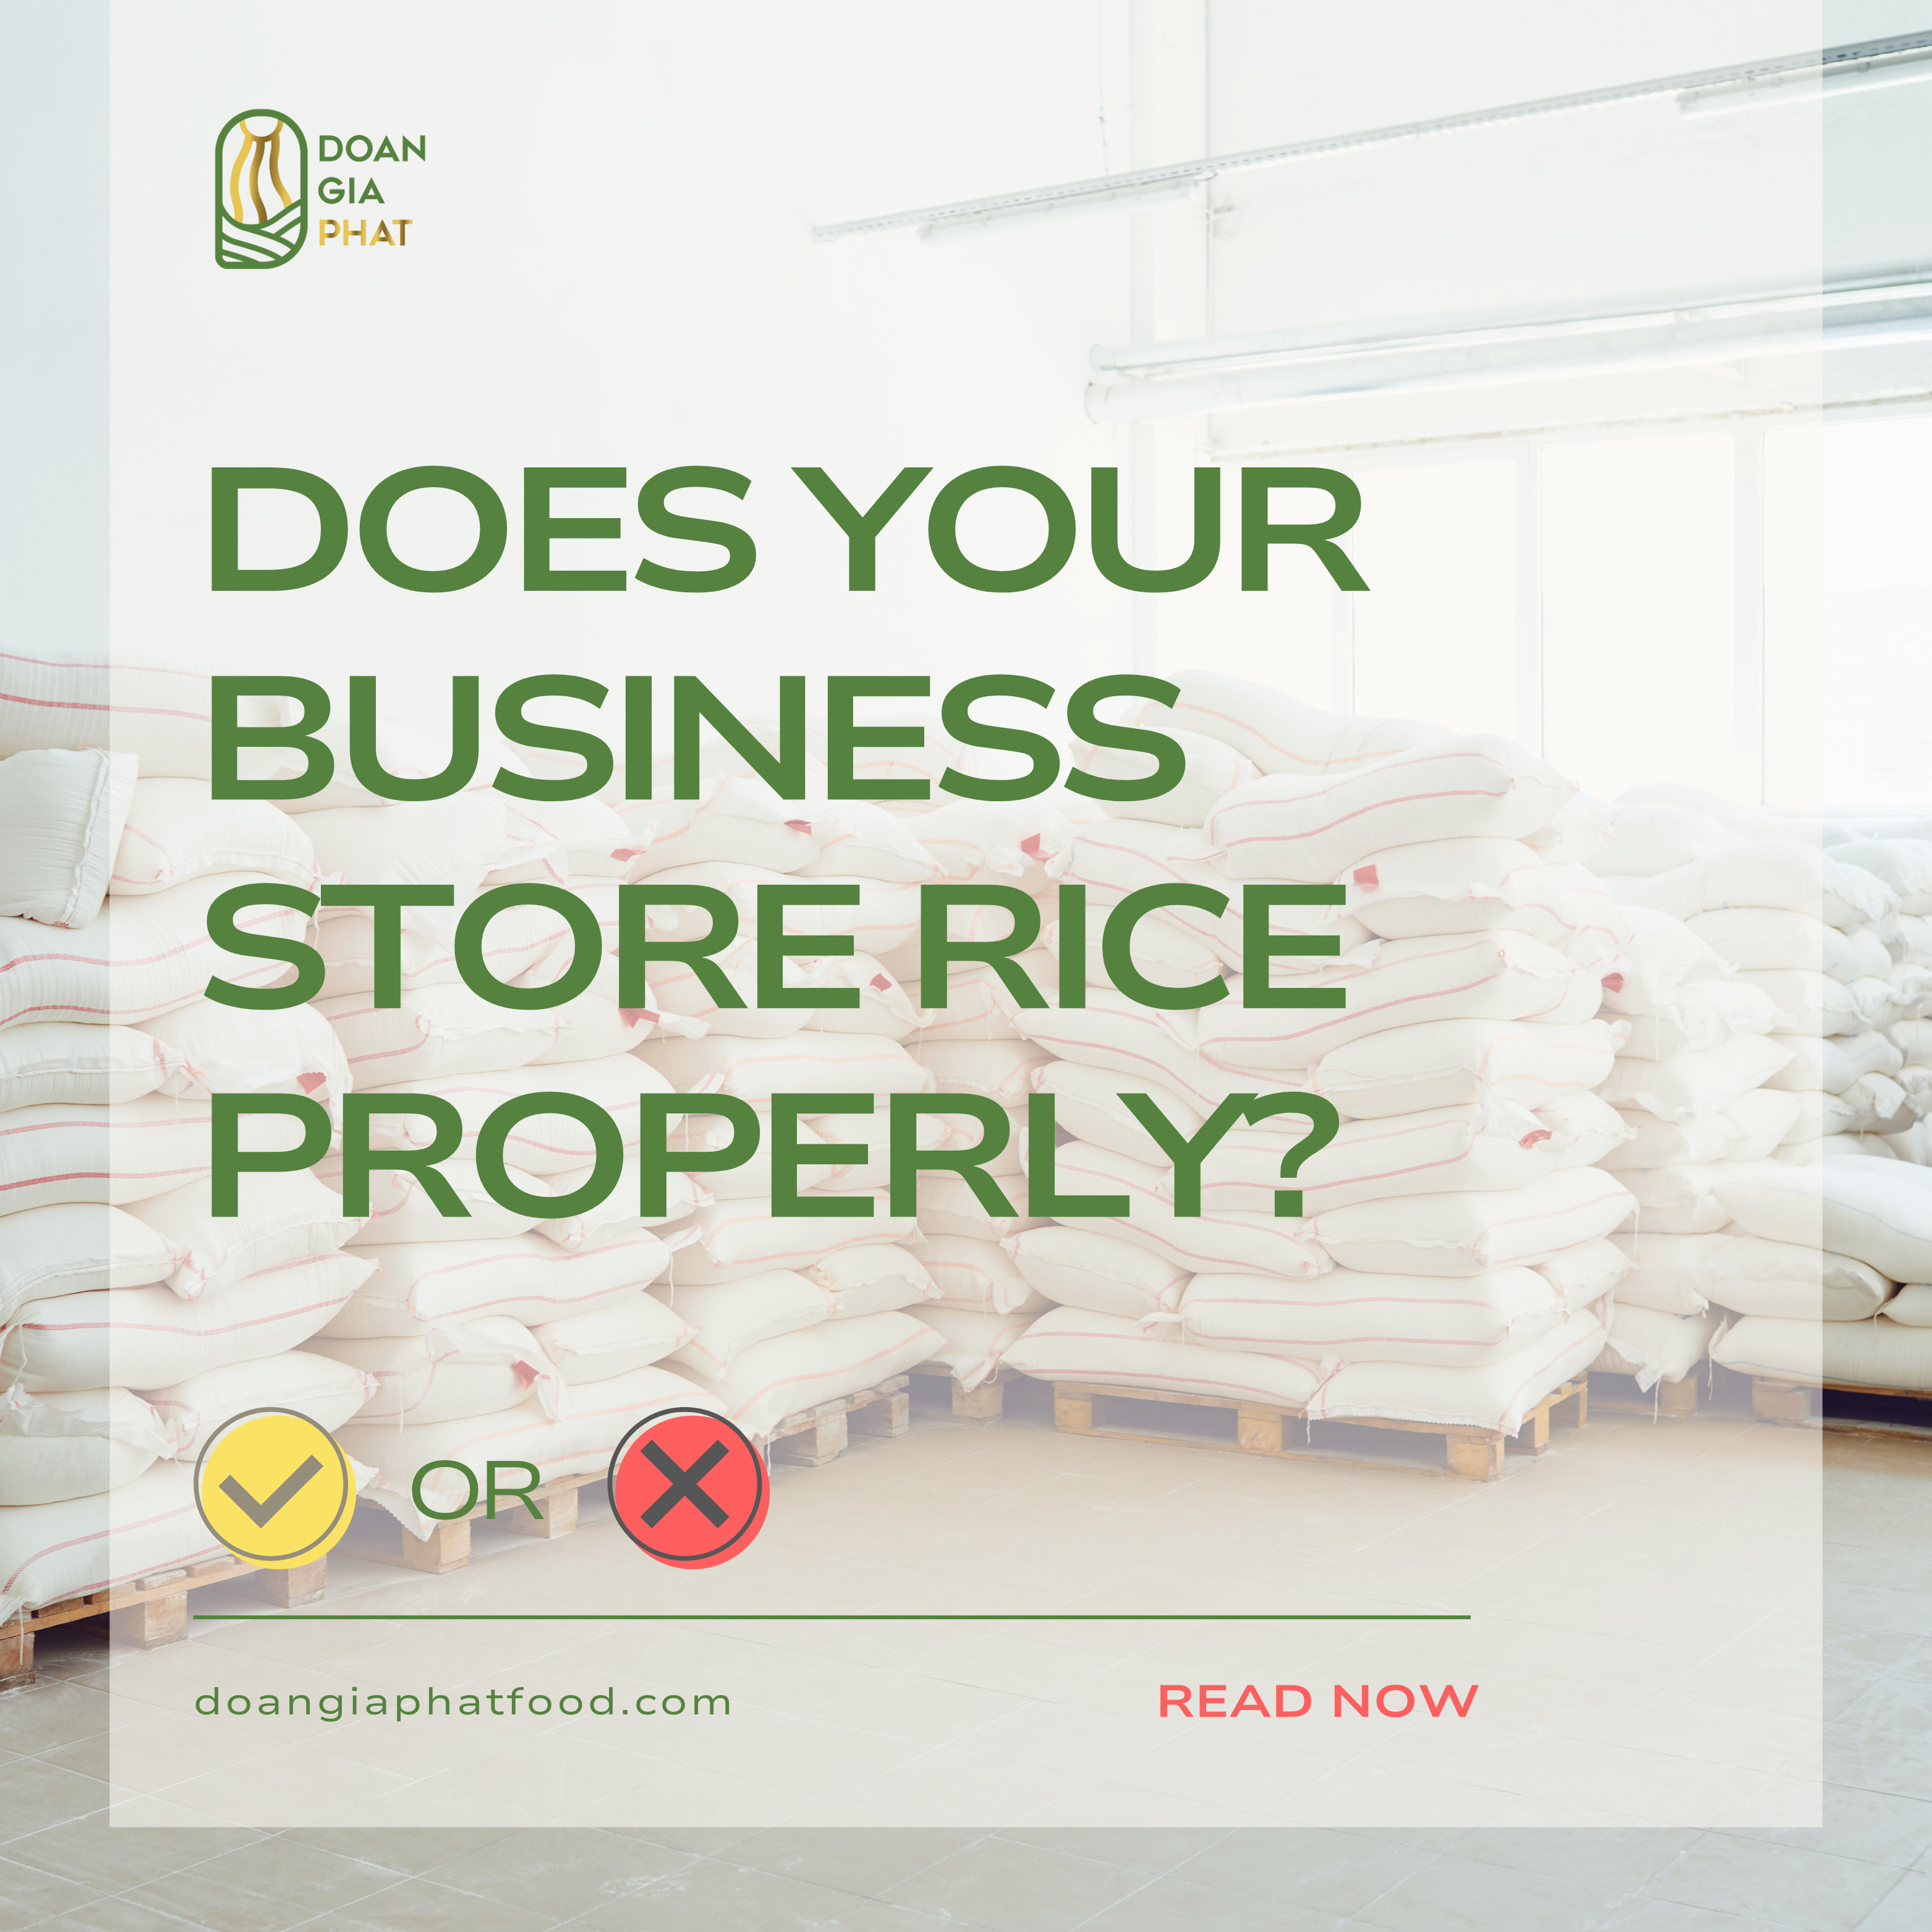 DOES-YOUR-BUSINESS-STORE-RICE-PROPERLY-?